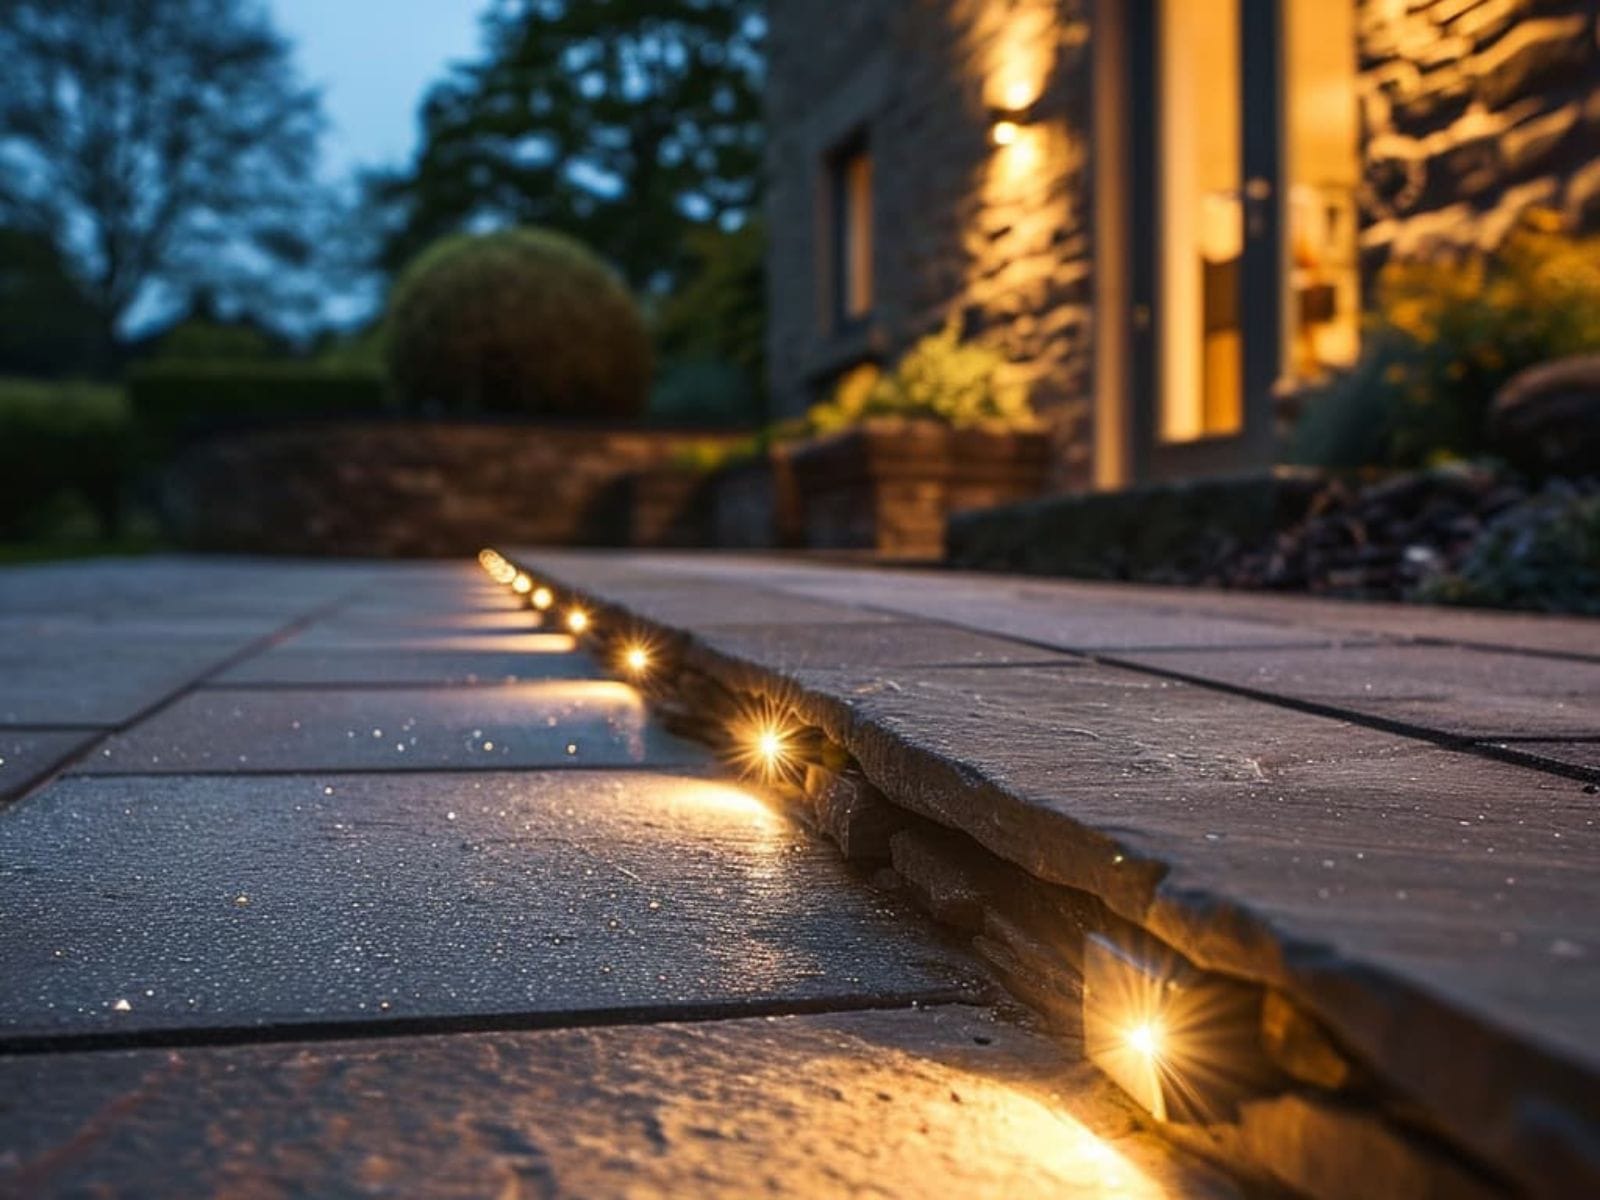 LED paver lights installed in the front yard parking zone